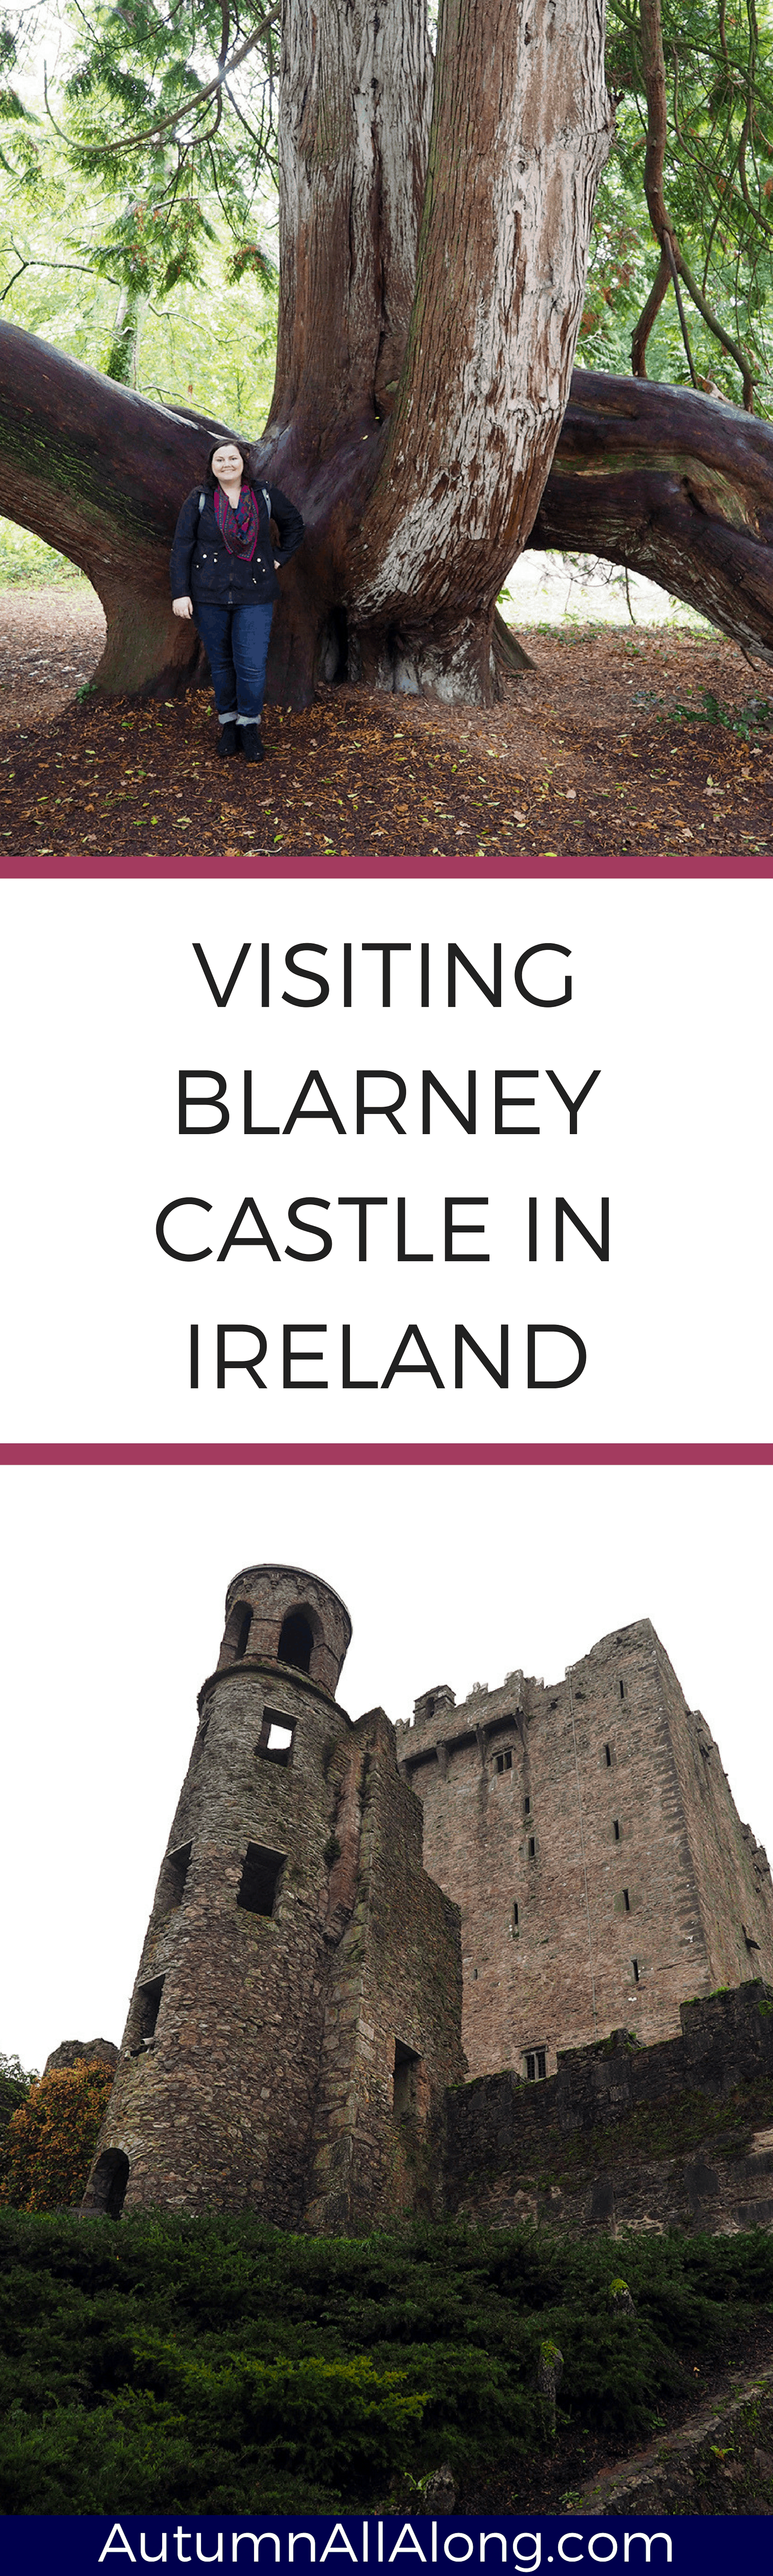 Reflectings on my trip to visit the Blarney Stone | via Autumn All Along